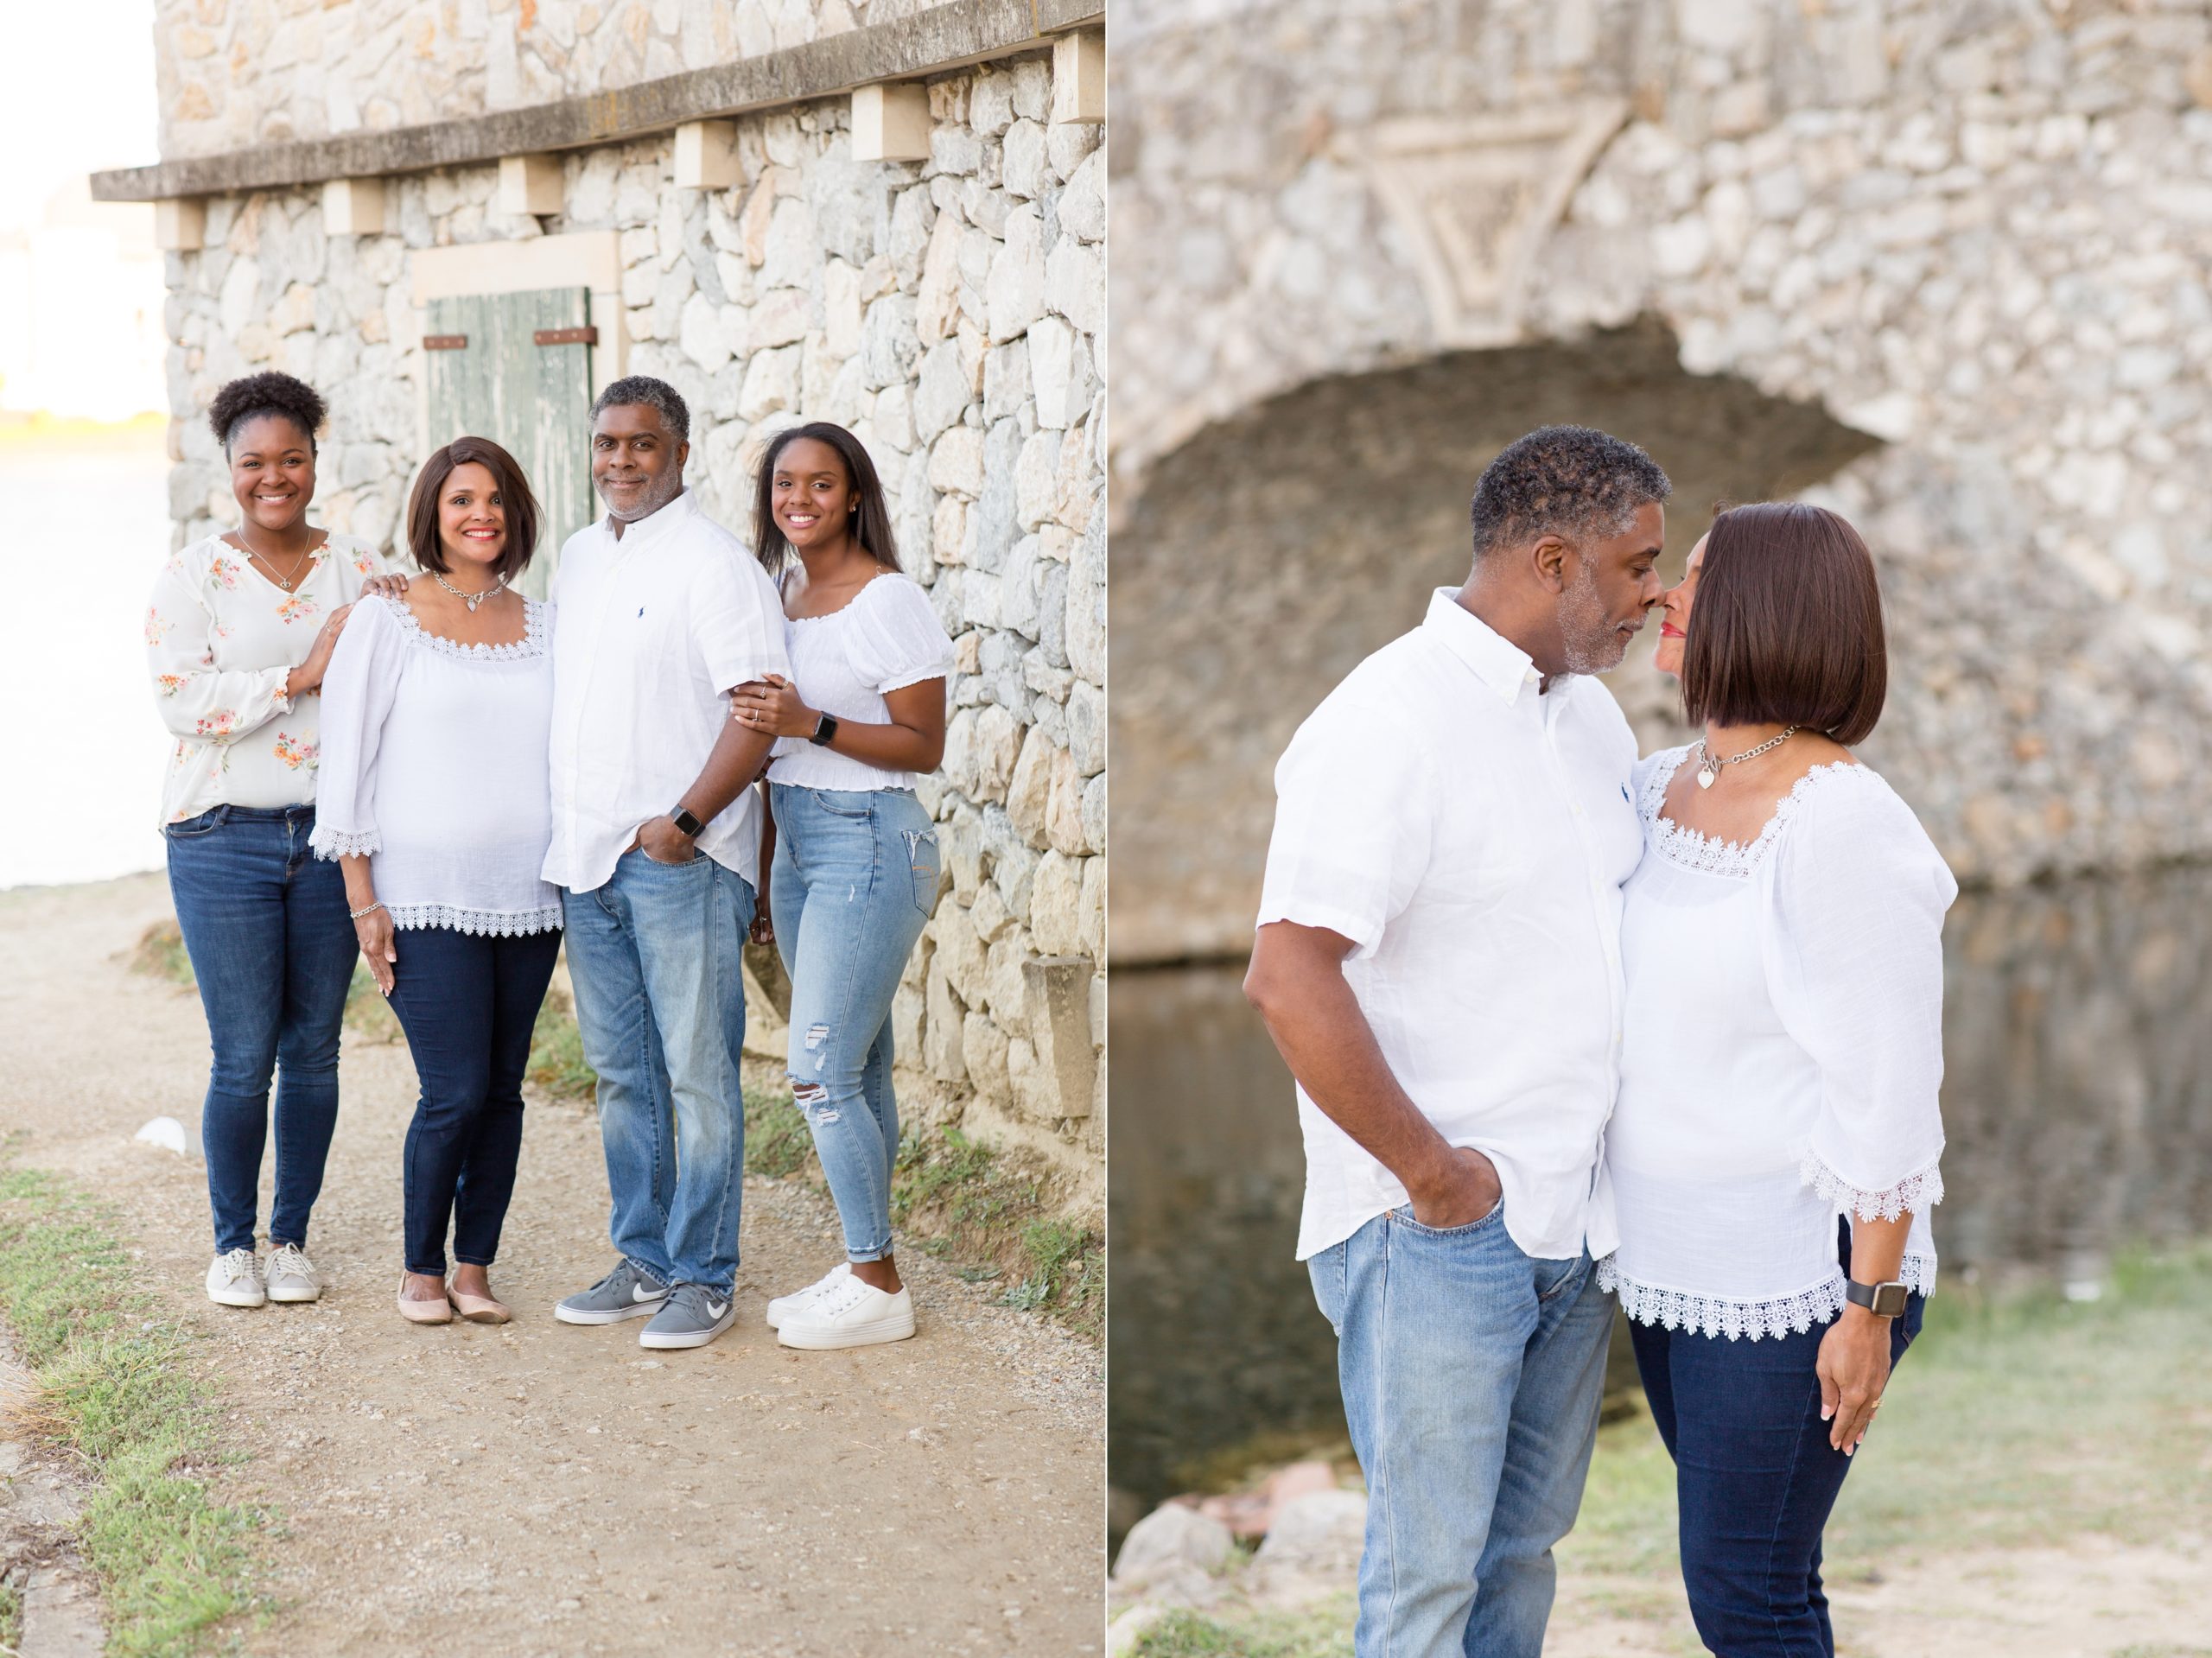 Mom and dad pose together and with daughter during spring family portrait session in McKinney, TX with family photographer Rebecca Rice Photography